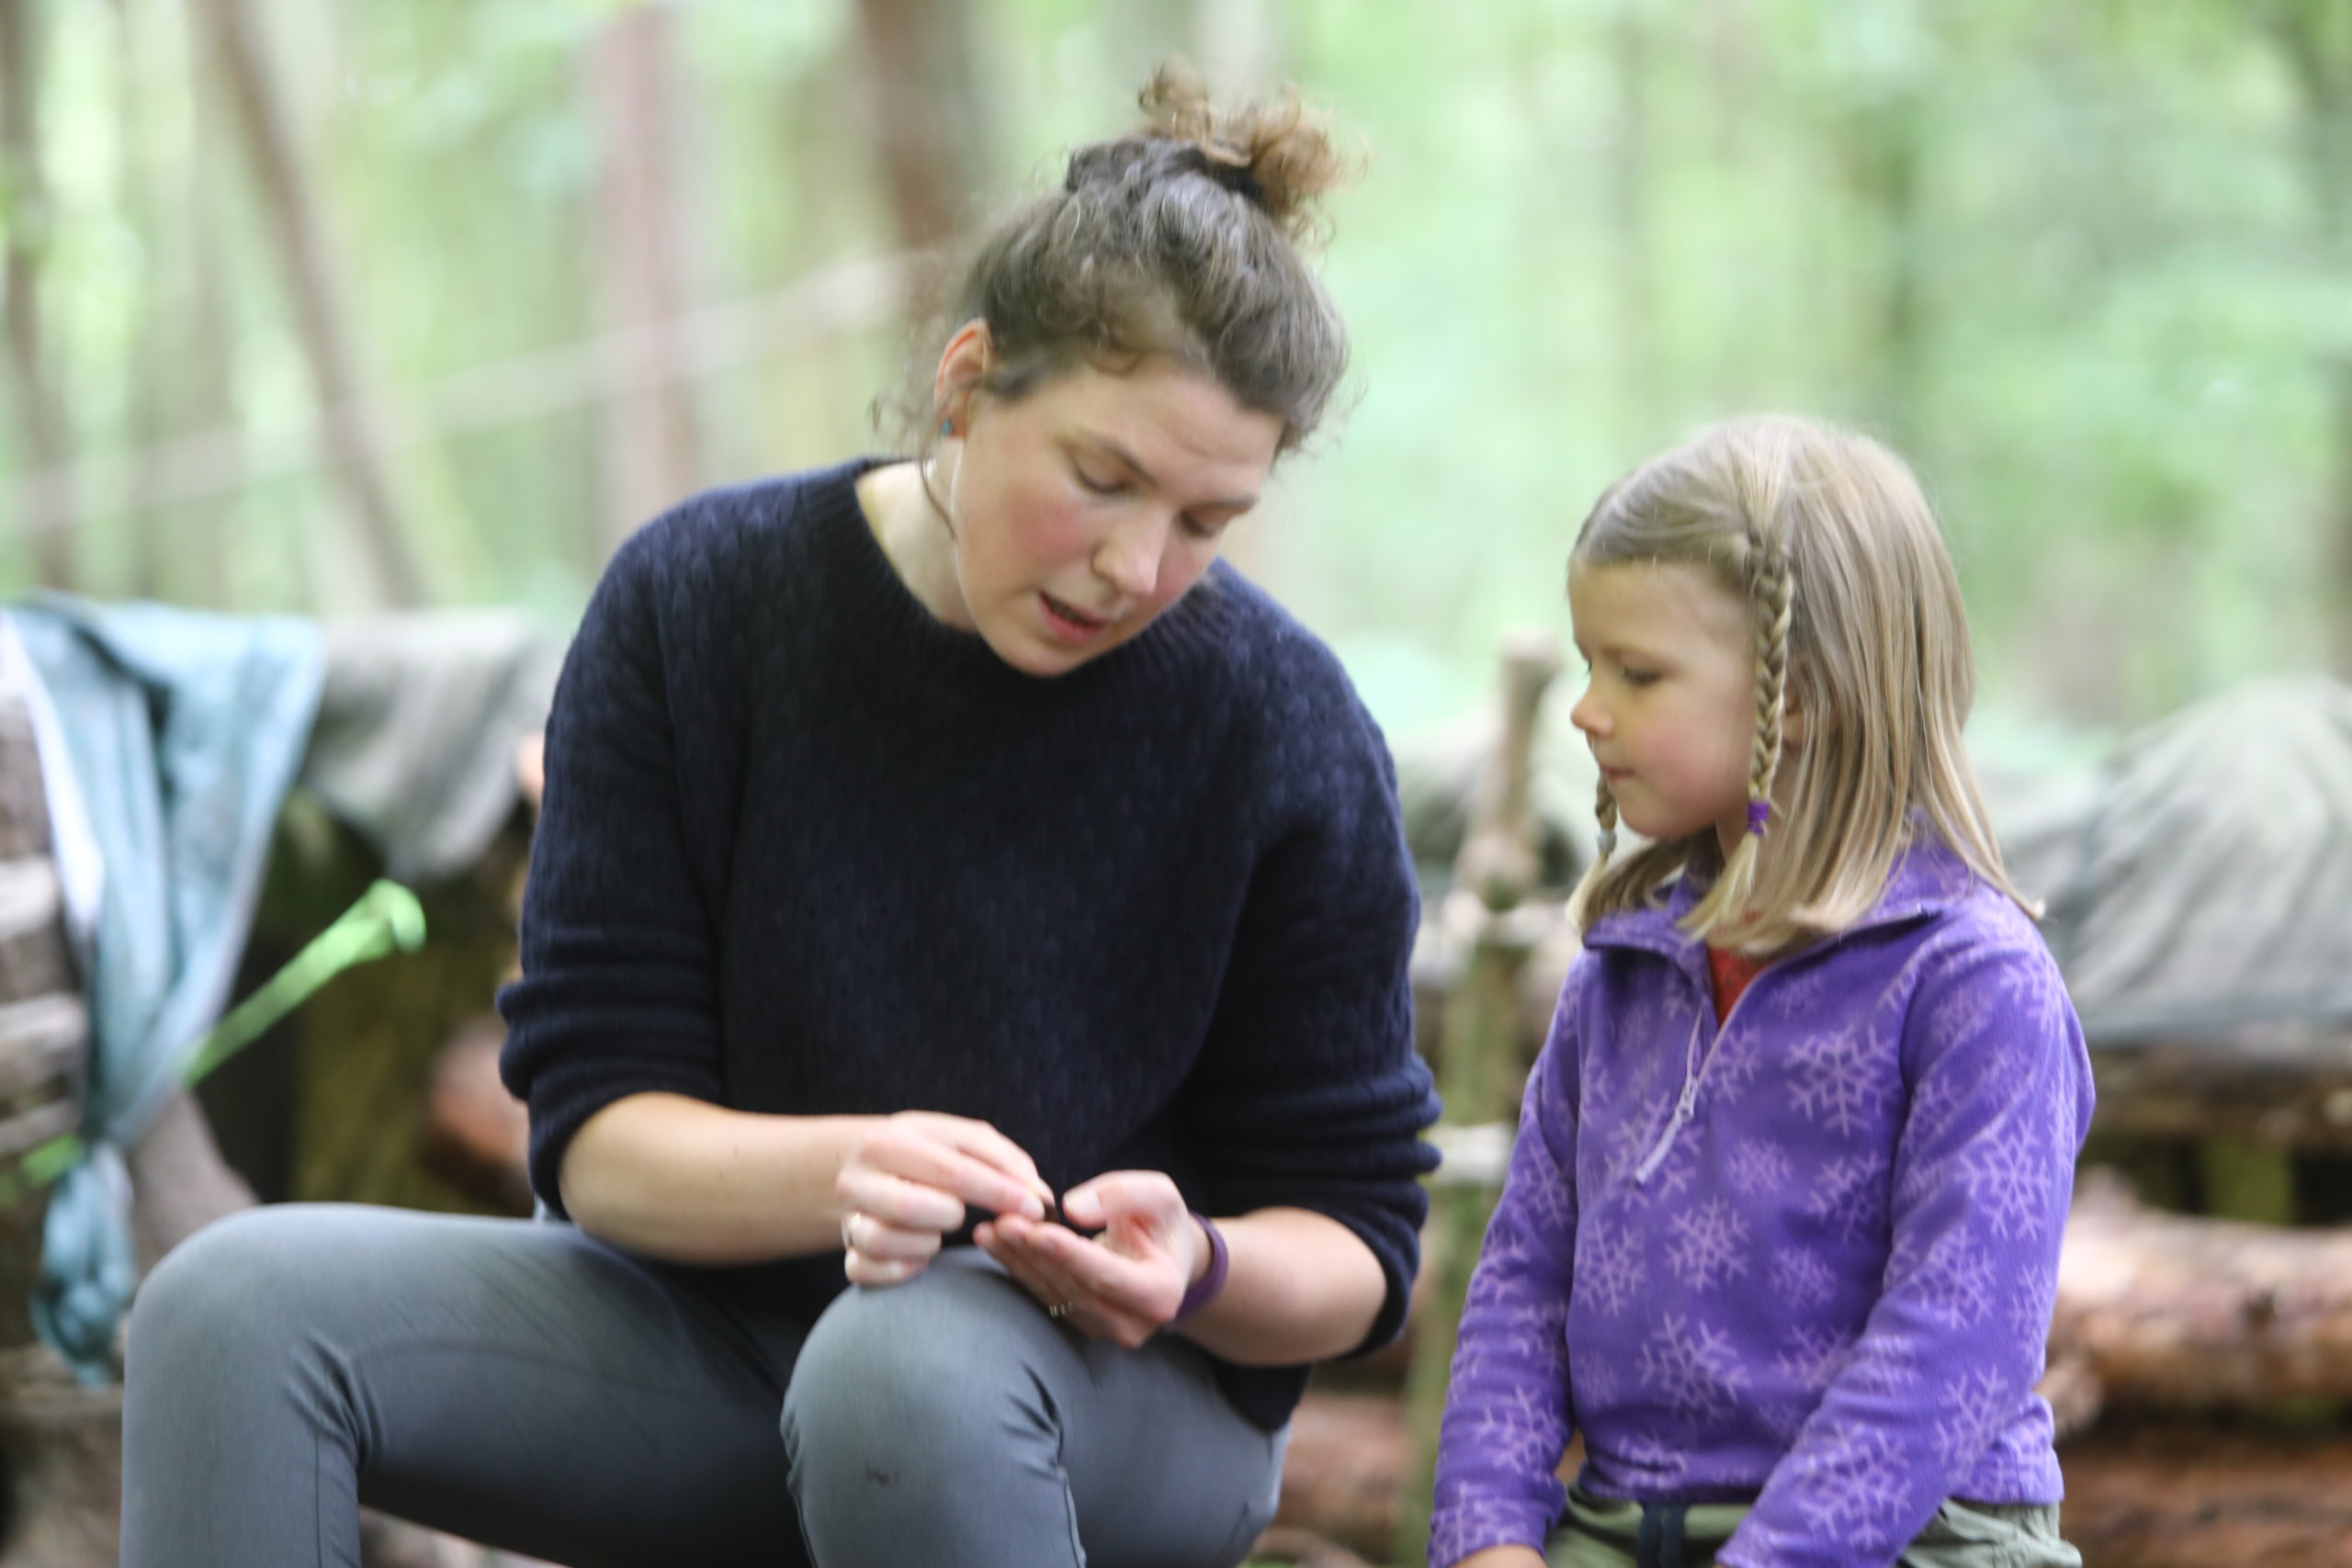 Manager Sarah Latto chats with one of the kids, at the Secret Garden Outdoor Nursery, near Letham.